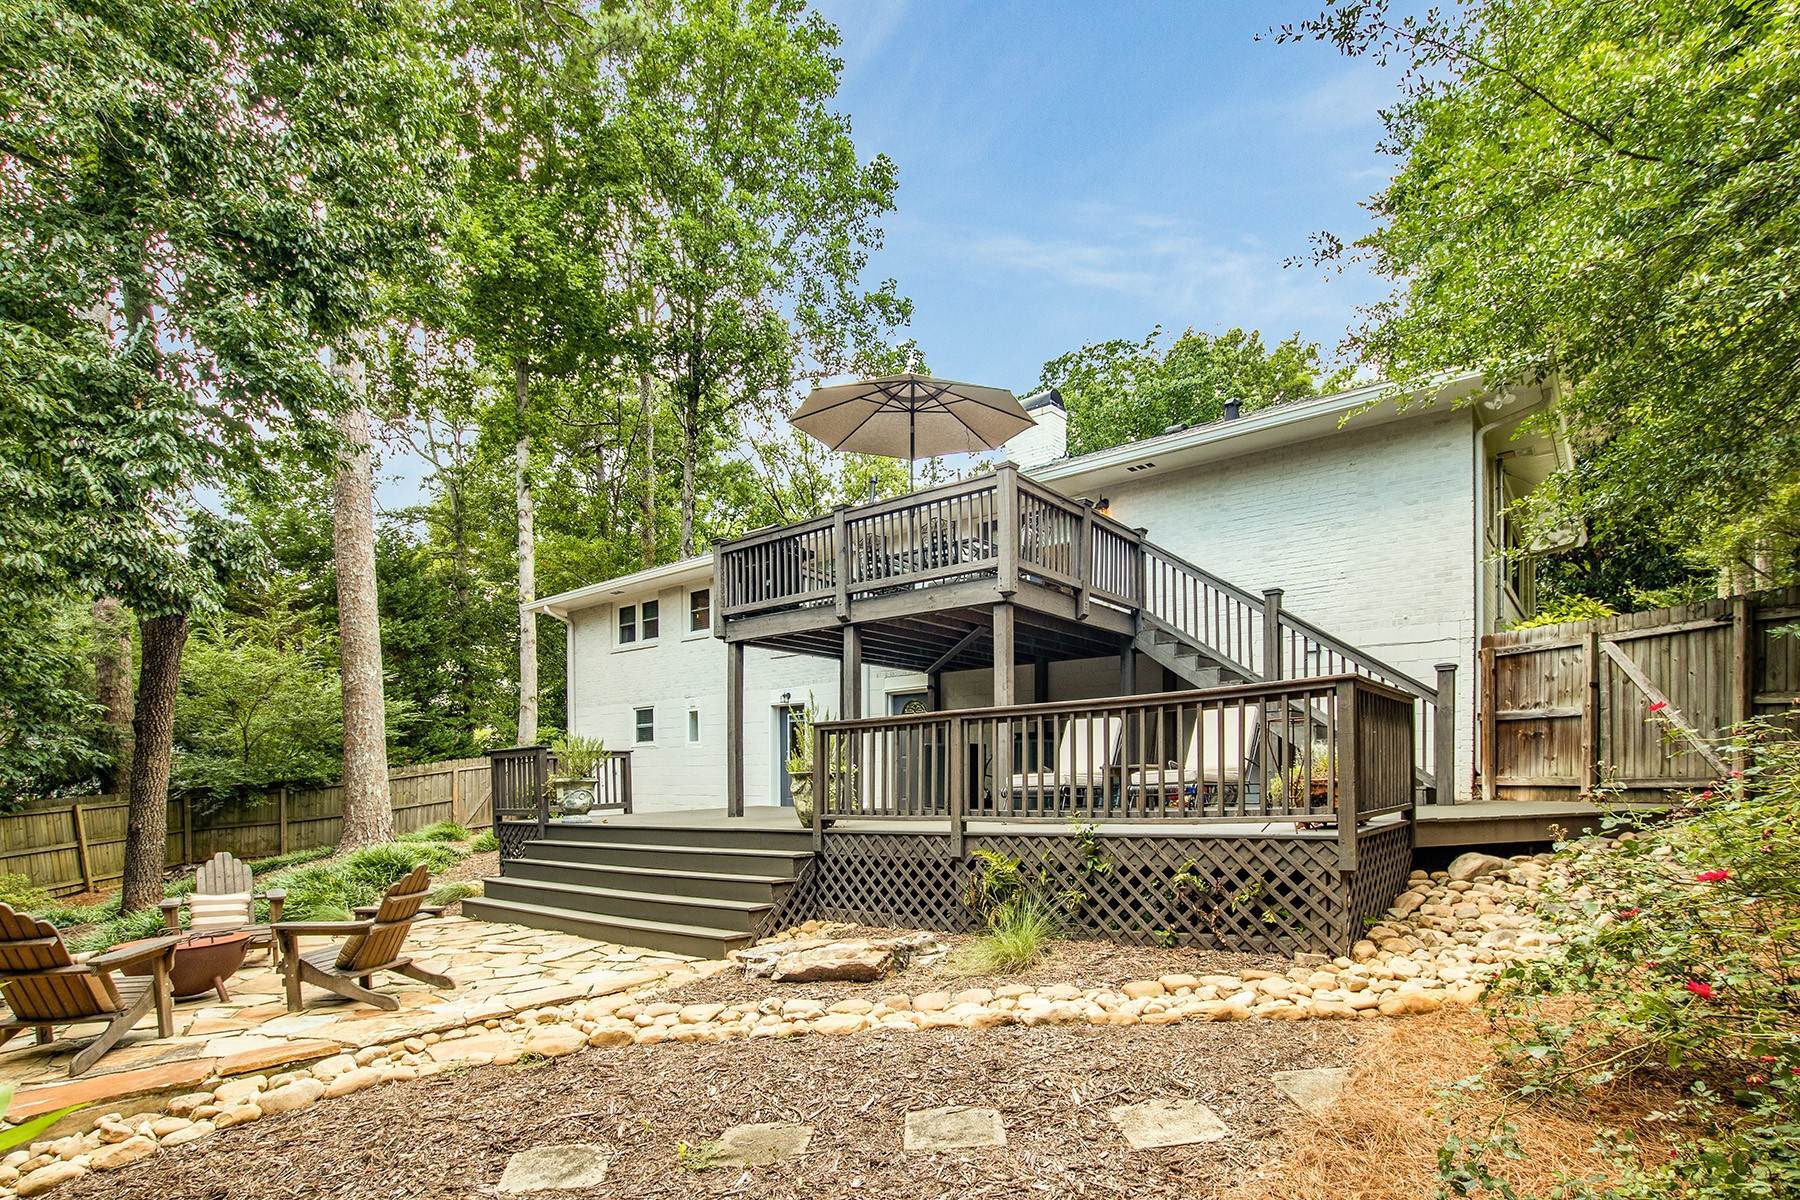 29. Single Family Homes for Sale at Chastain Park Renovated Light And Dairy Open Concept Ranch 101 Mount Paran Road NE Atlanta, Georgia 30342 United States